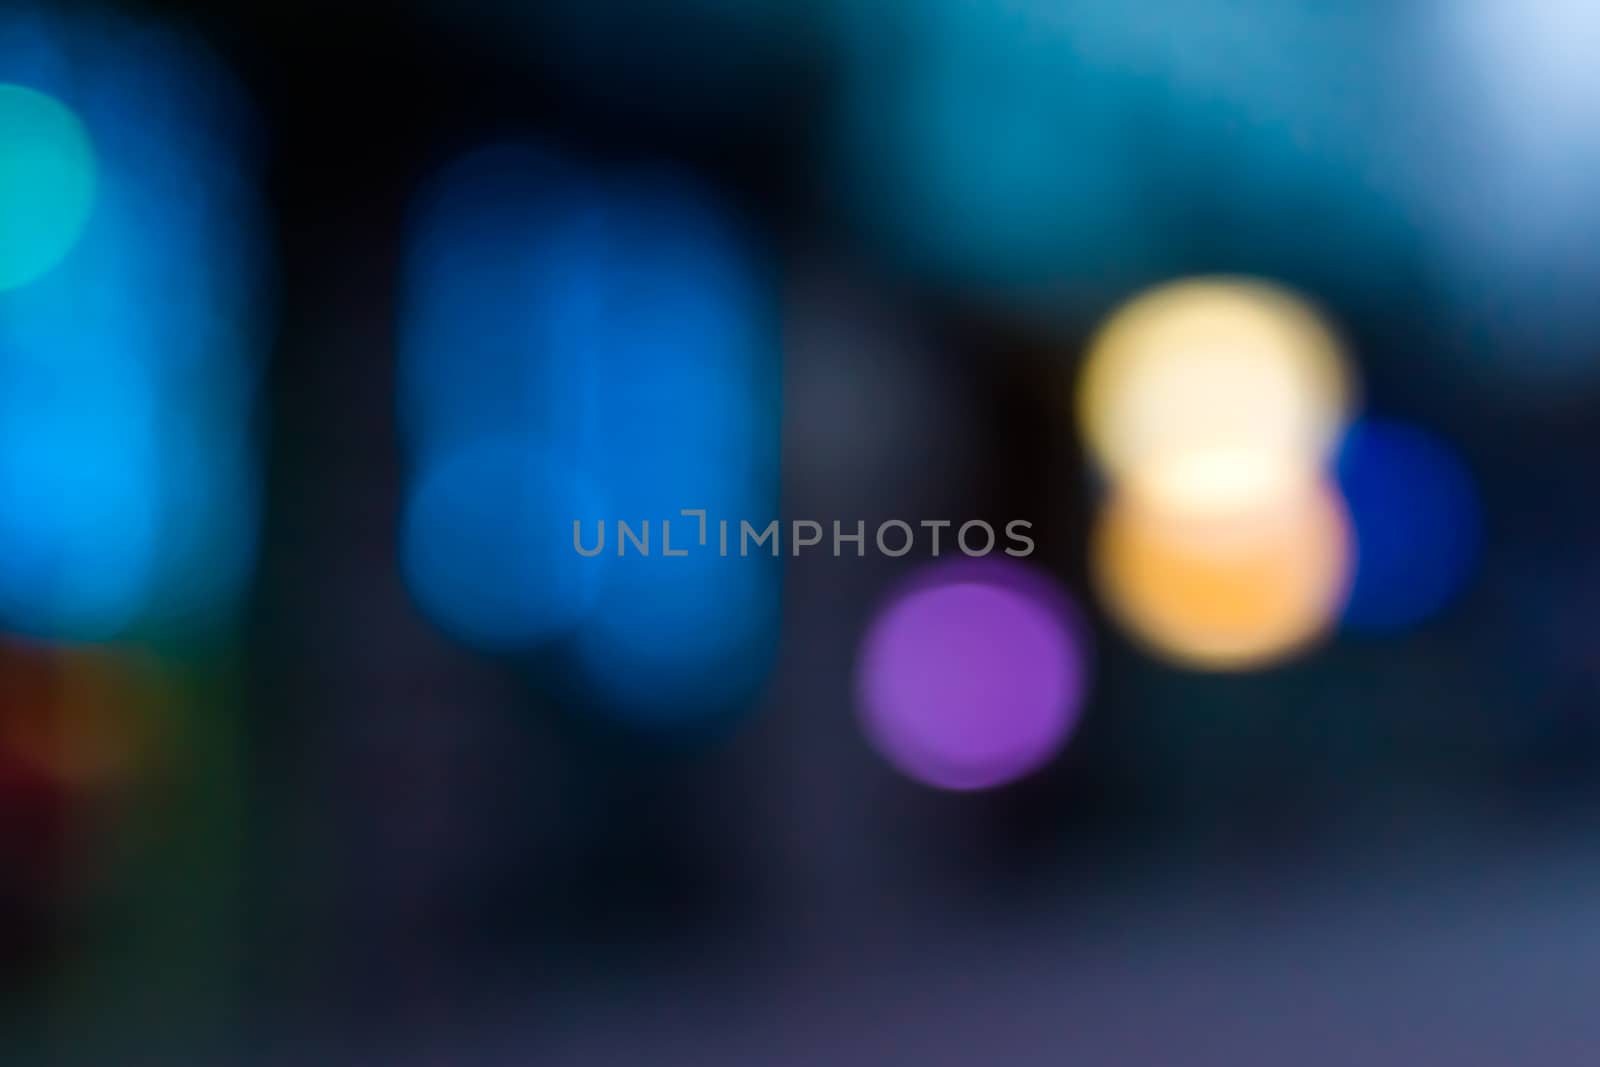 abstract blur evening urban street lighting. Using yellow, blue and purple color on a dark blue background.